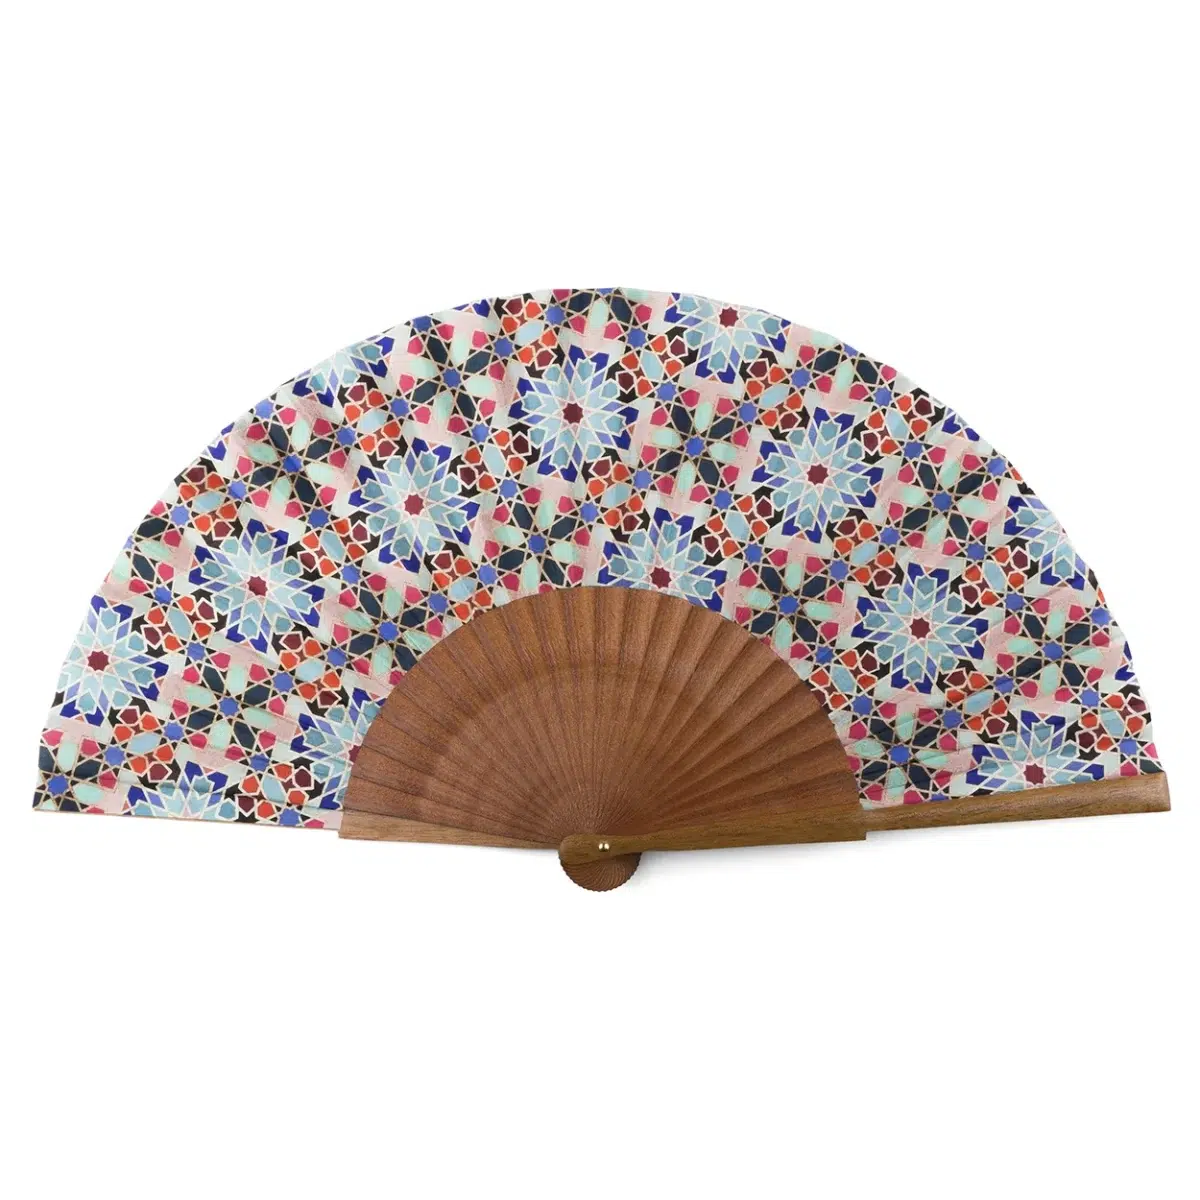 Silk and Wood Fan with Multicolored Arabesque Geometry Print.